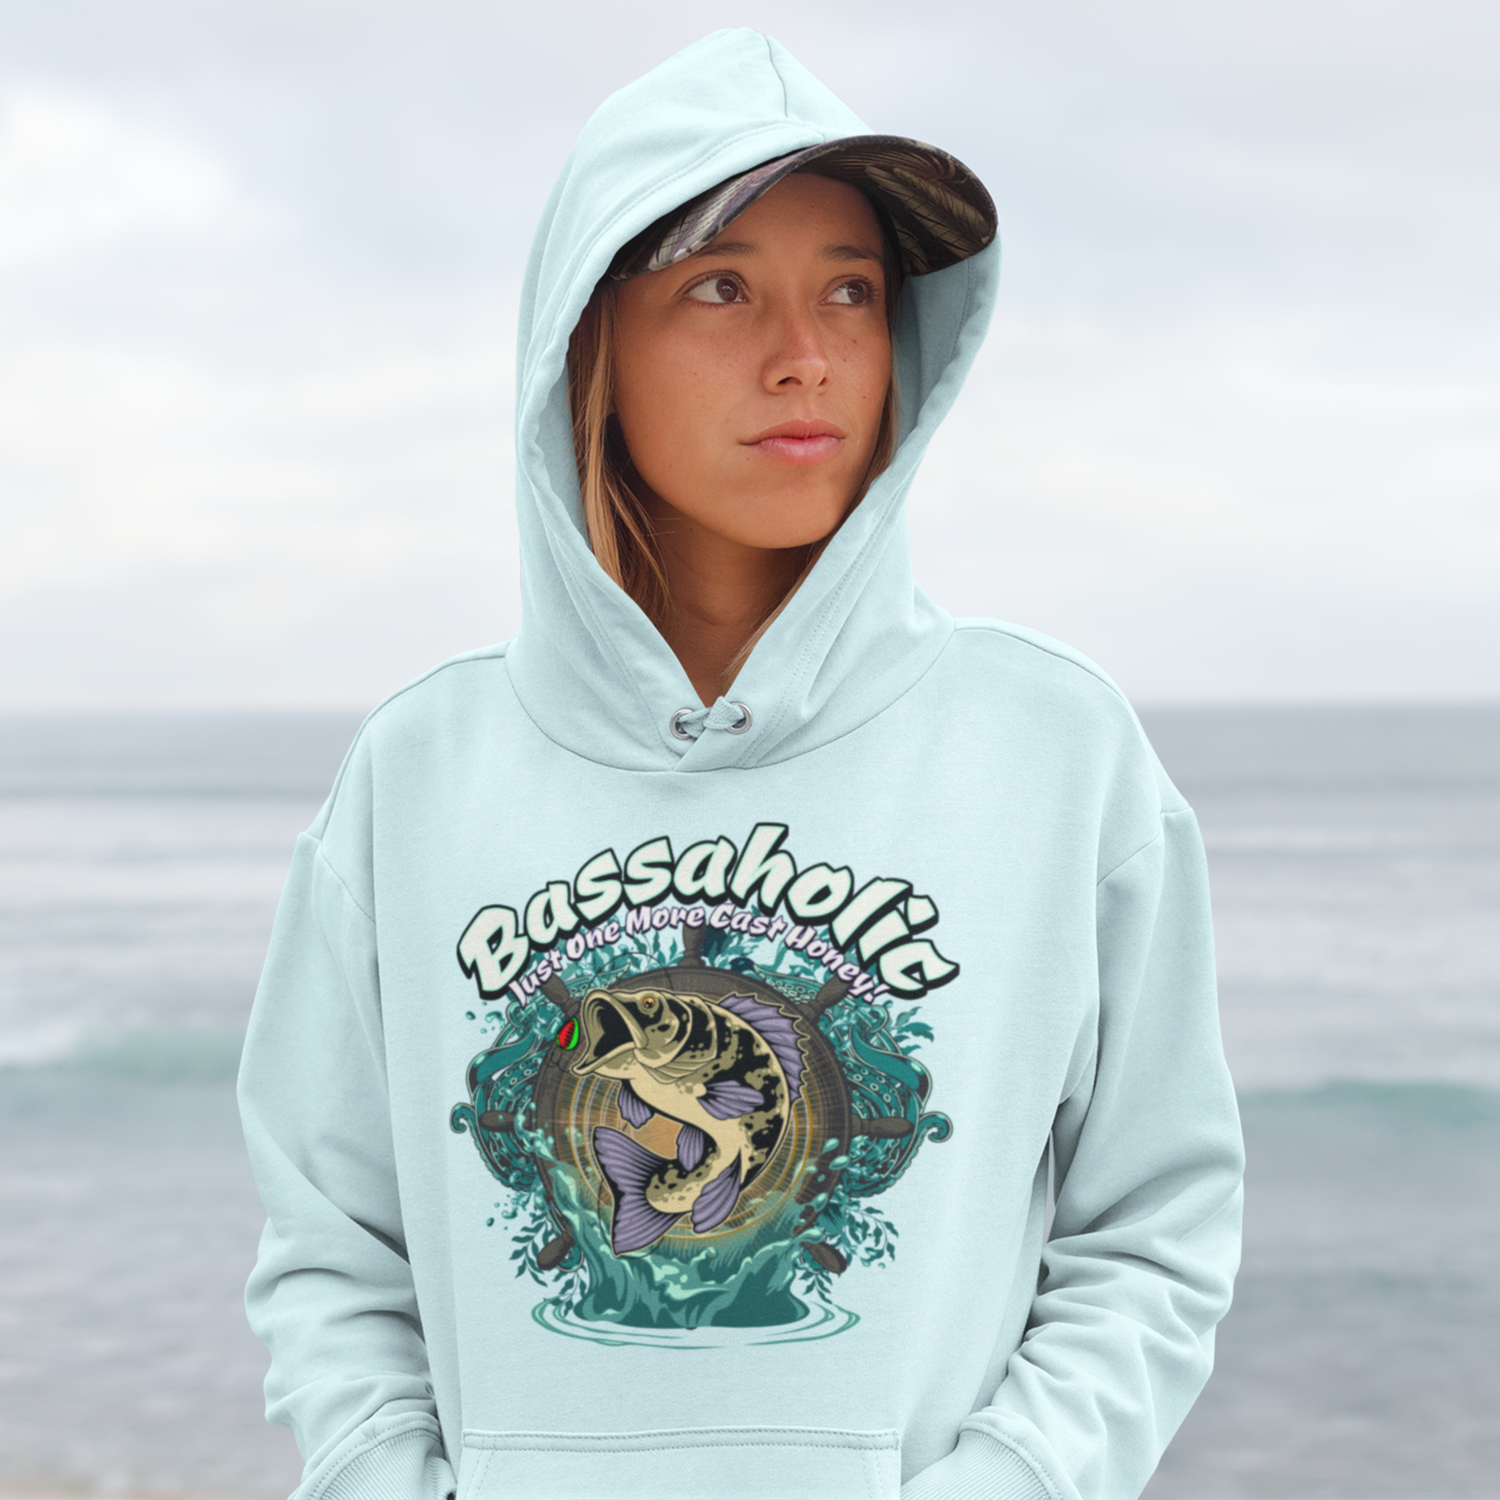 women wearing light blue fishing hoodie with graphic by Arczeal Designs